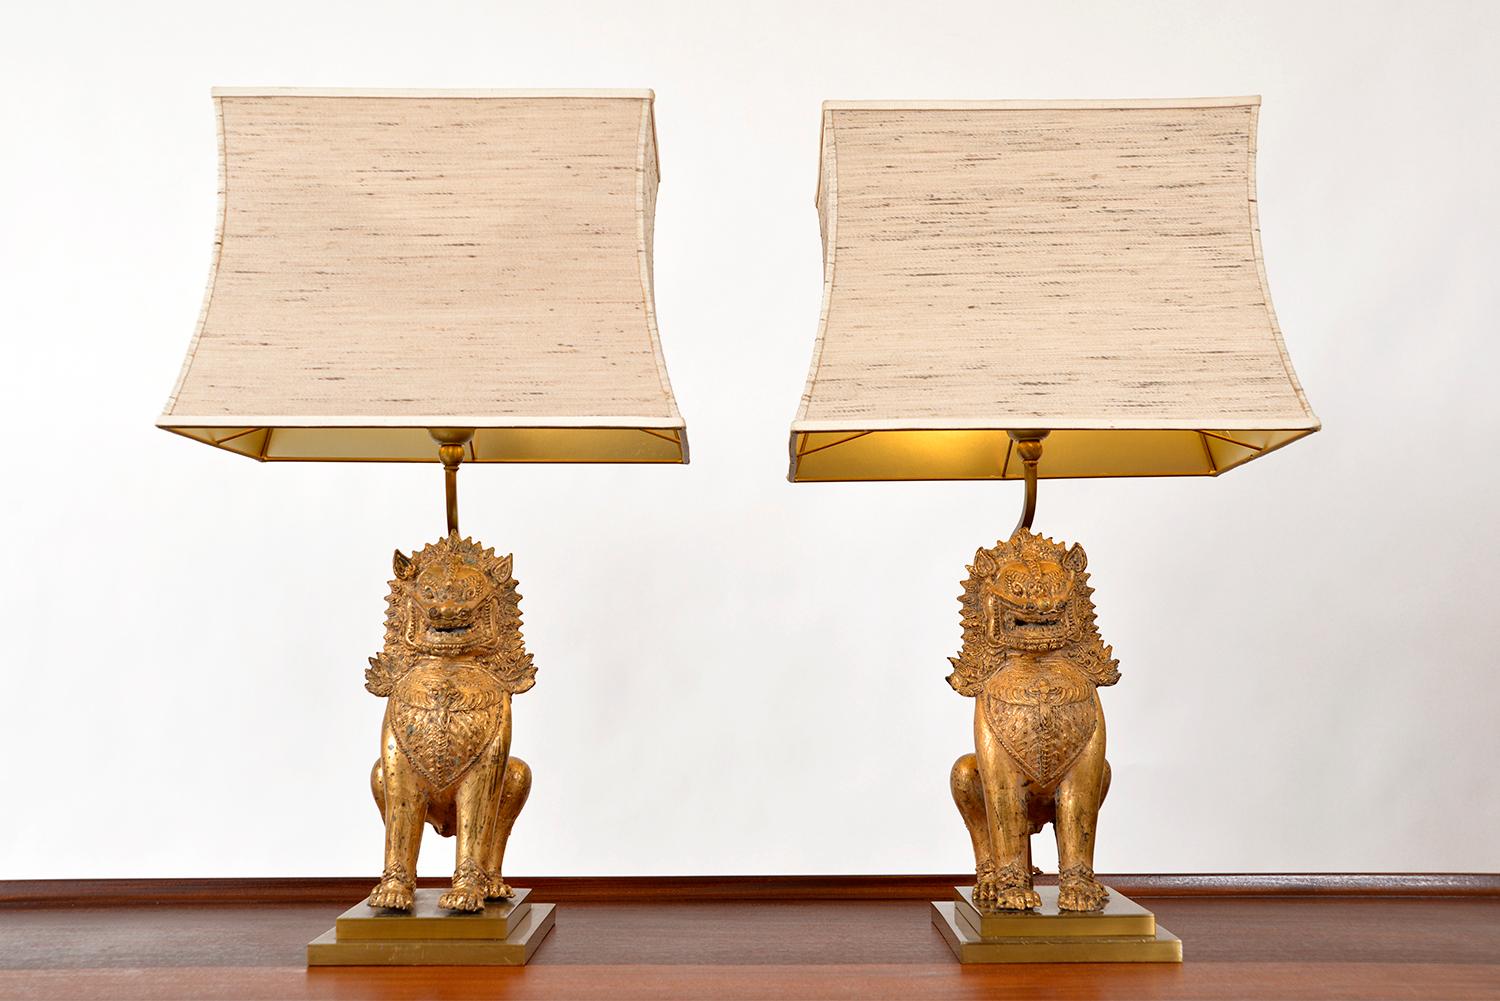 A highly decorative pair of 1960s Asian Dogs of Foo table lamps in a gilt chinoiserie finish, on stepped cast brass bases with original vintage Pergoda shades - very James Mont!
Both lamps have a period label to the base, indicating that they were